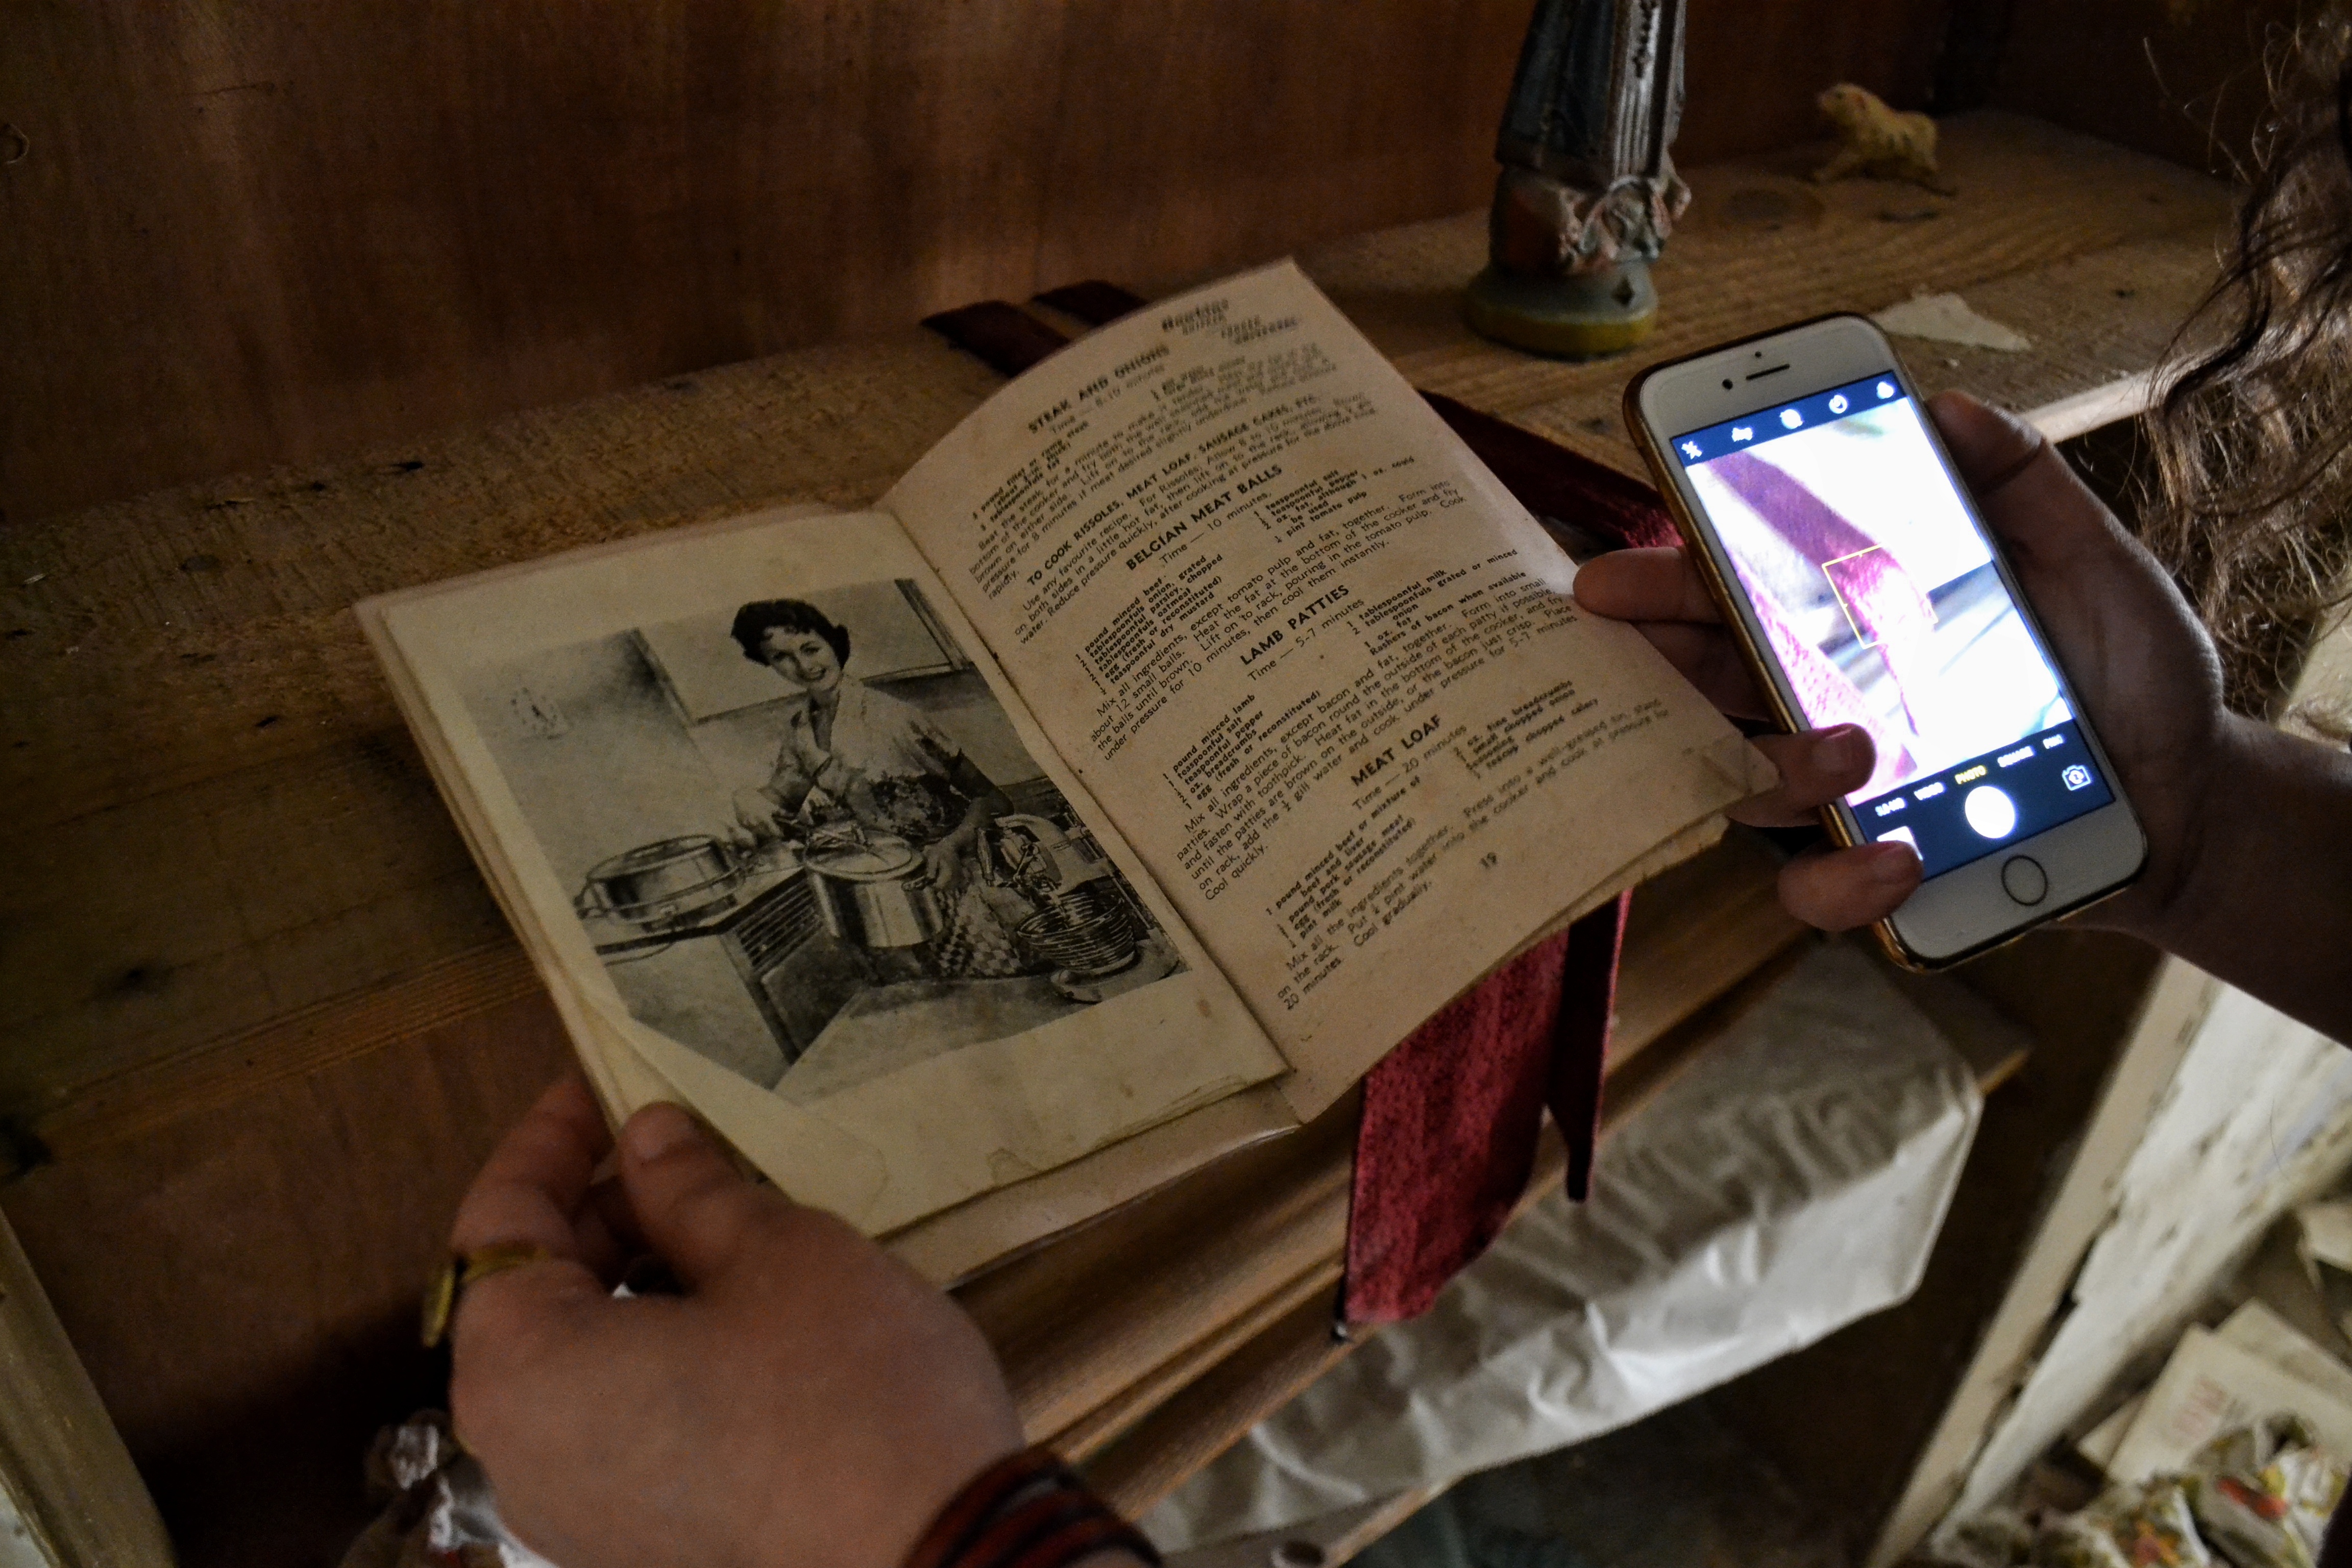 Mezher examines an old recipe book from the 1950s